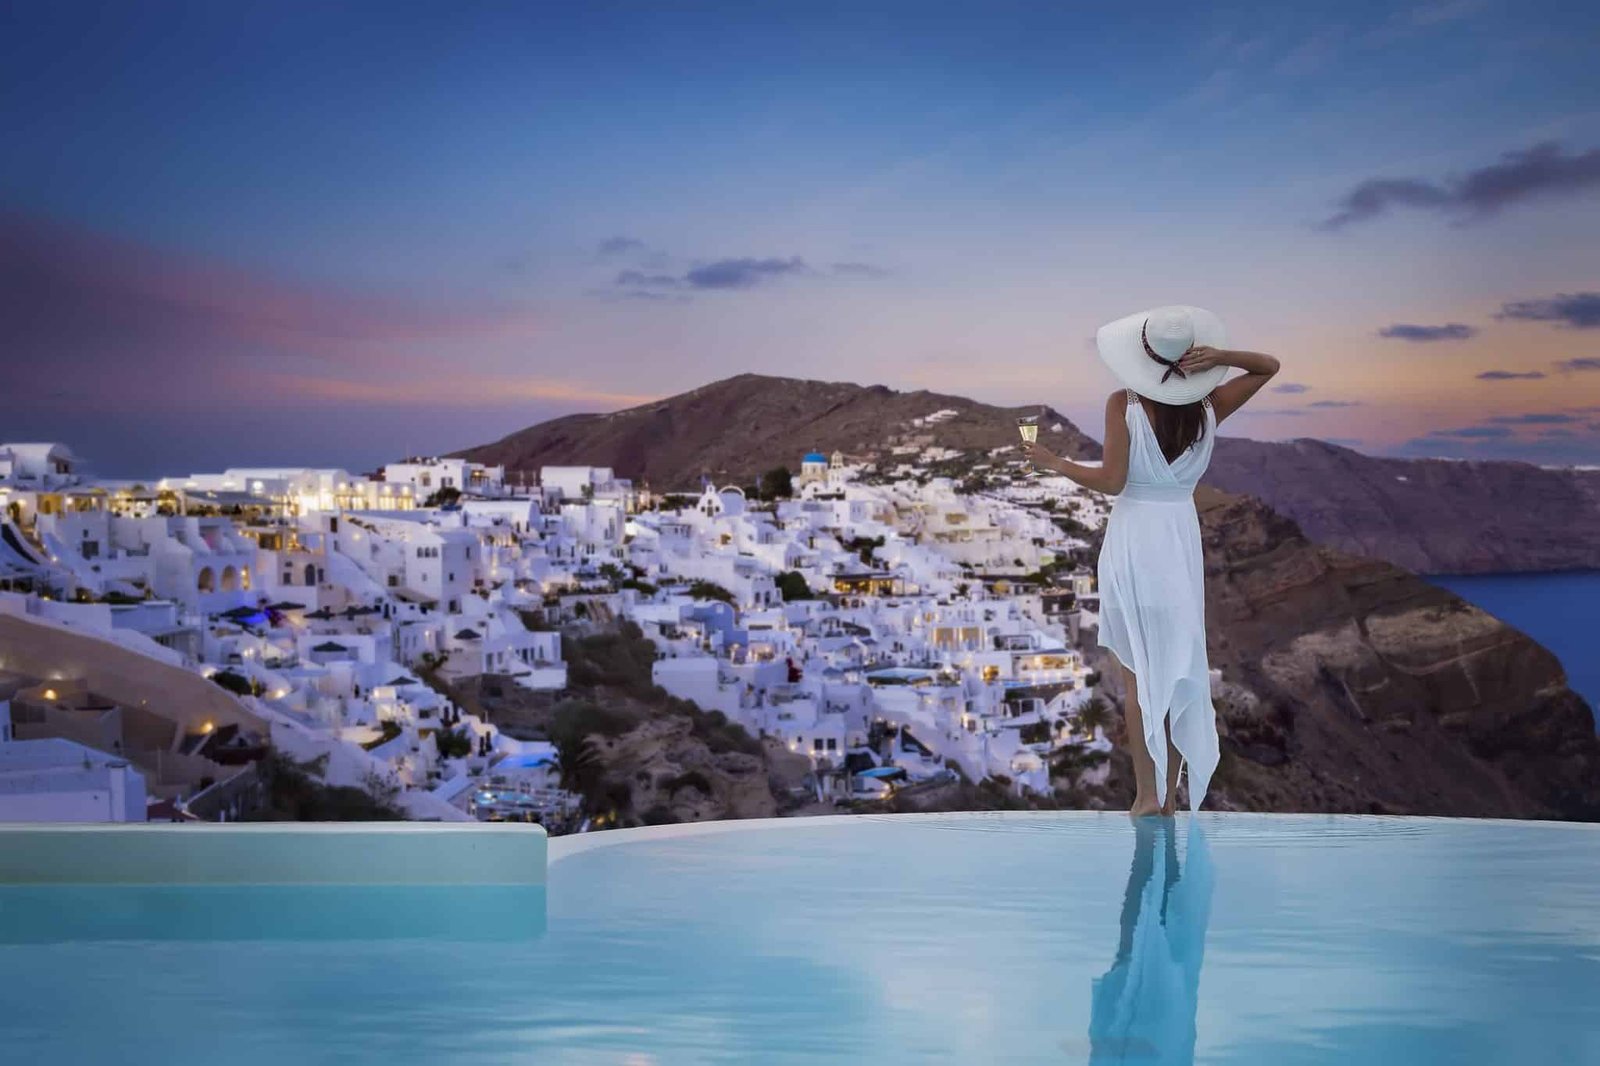 A woman in a white dress stands by the swimming pool and enjoys the view over the illuminated village of Oia, Santorini island, Greece, during summer sunset time